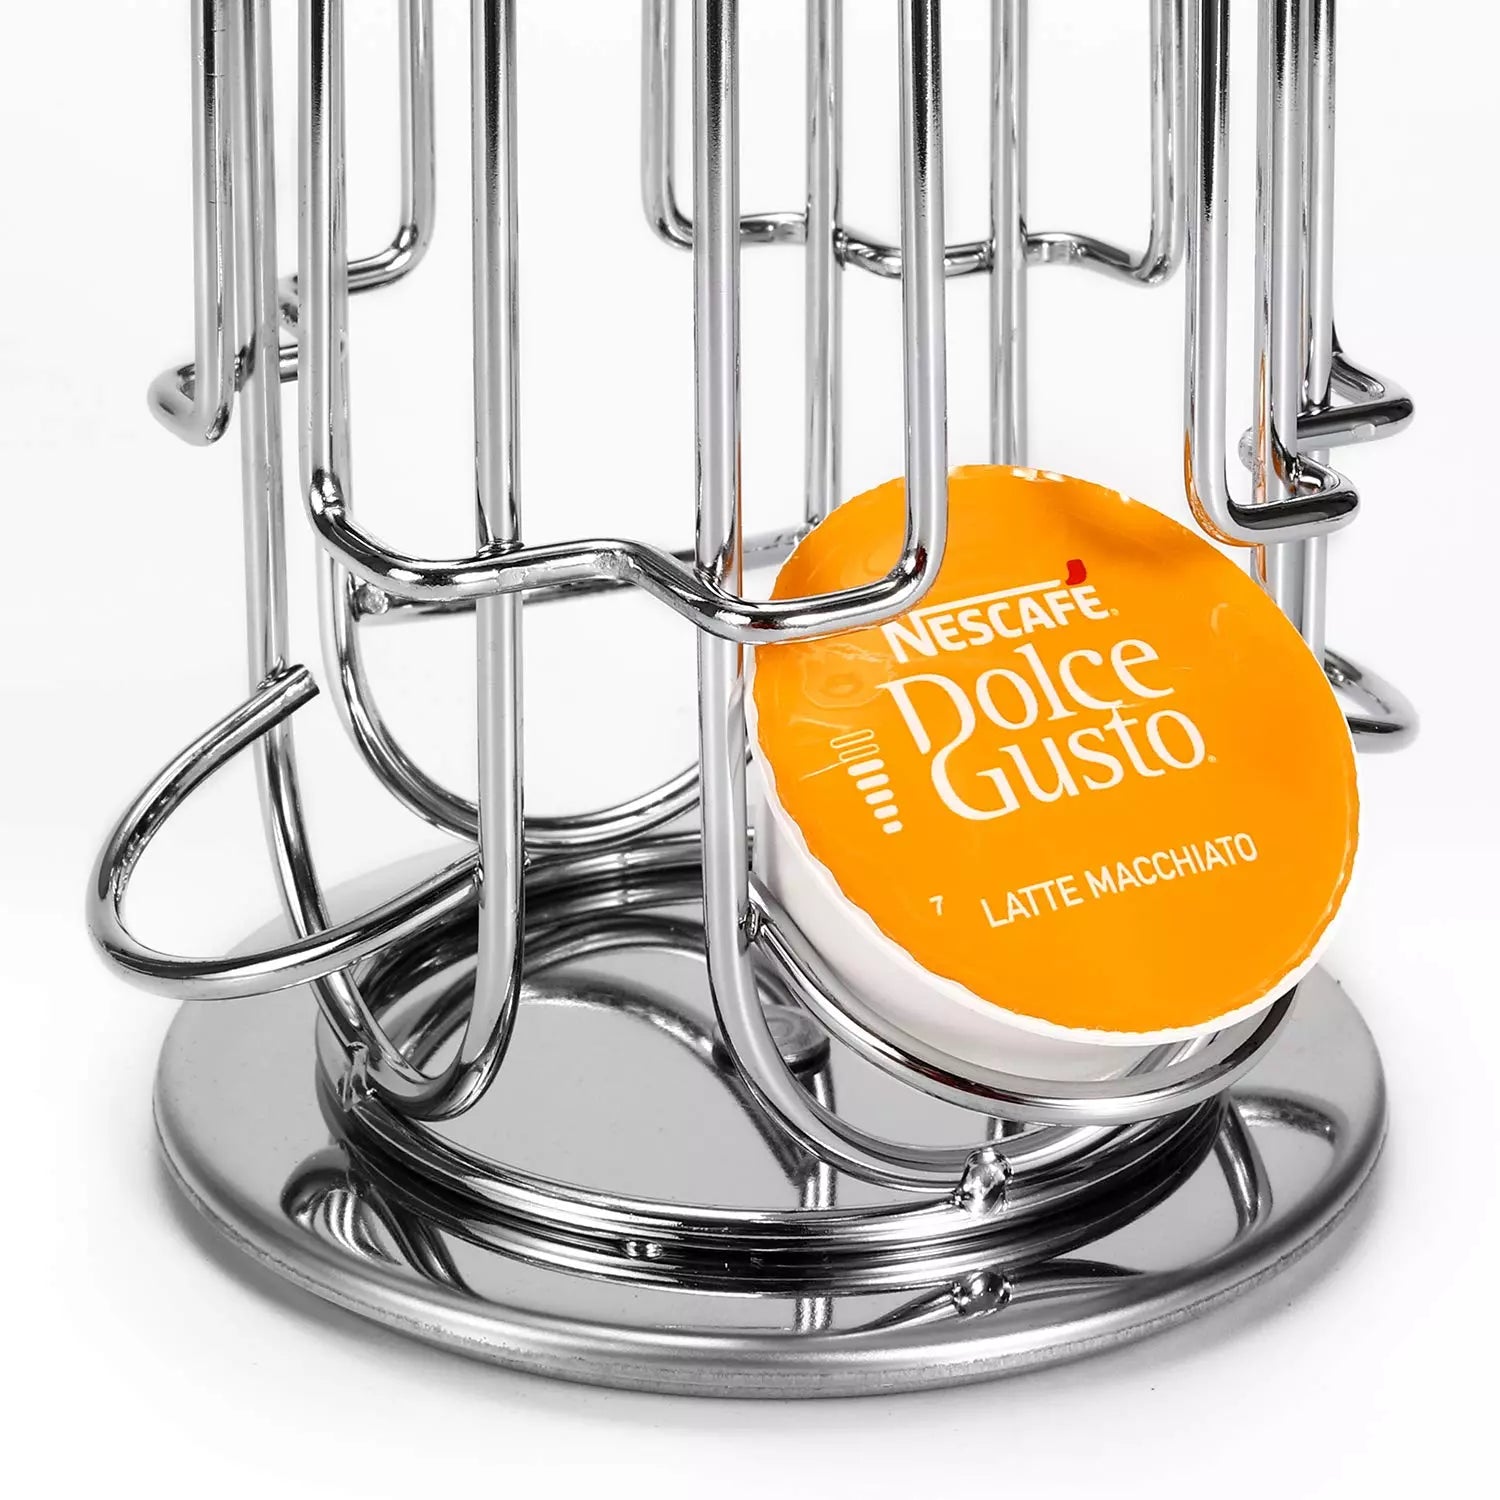 24 Coffee Pod Holder - Rotating Chrome Tower Storage Stand for Coffee Capsules